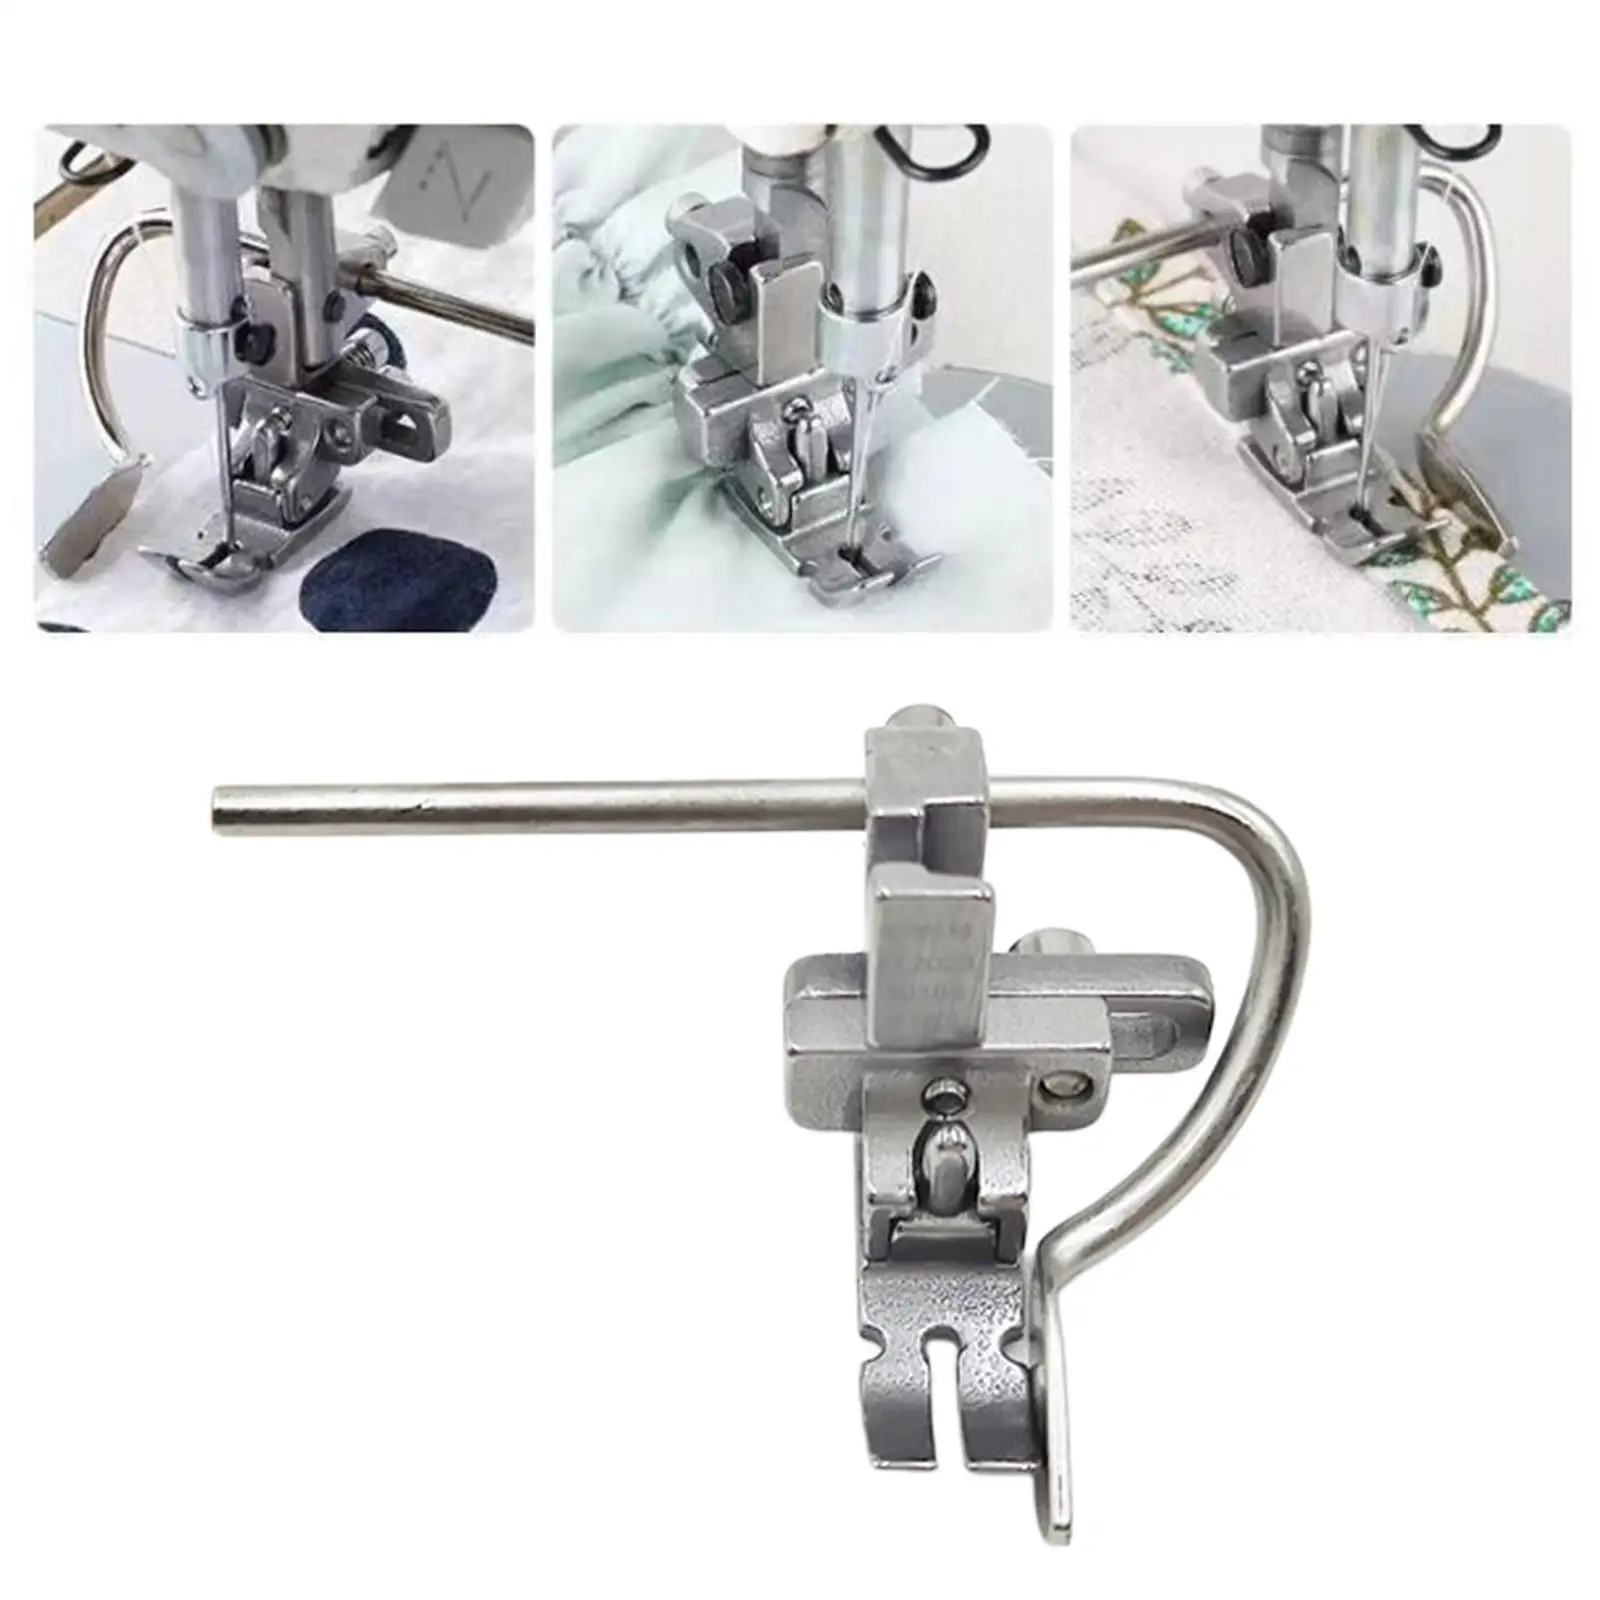 Presser Foot for Sewing Machine for DIY Arts Crafts Embroidery Machine